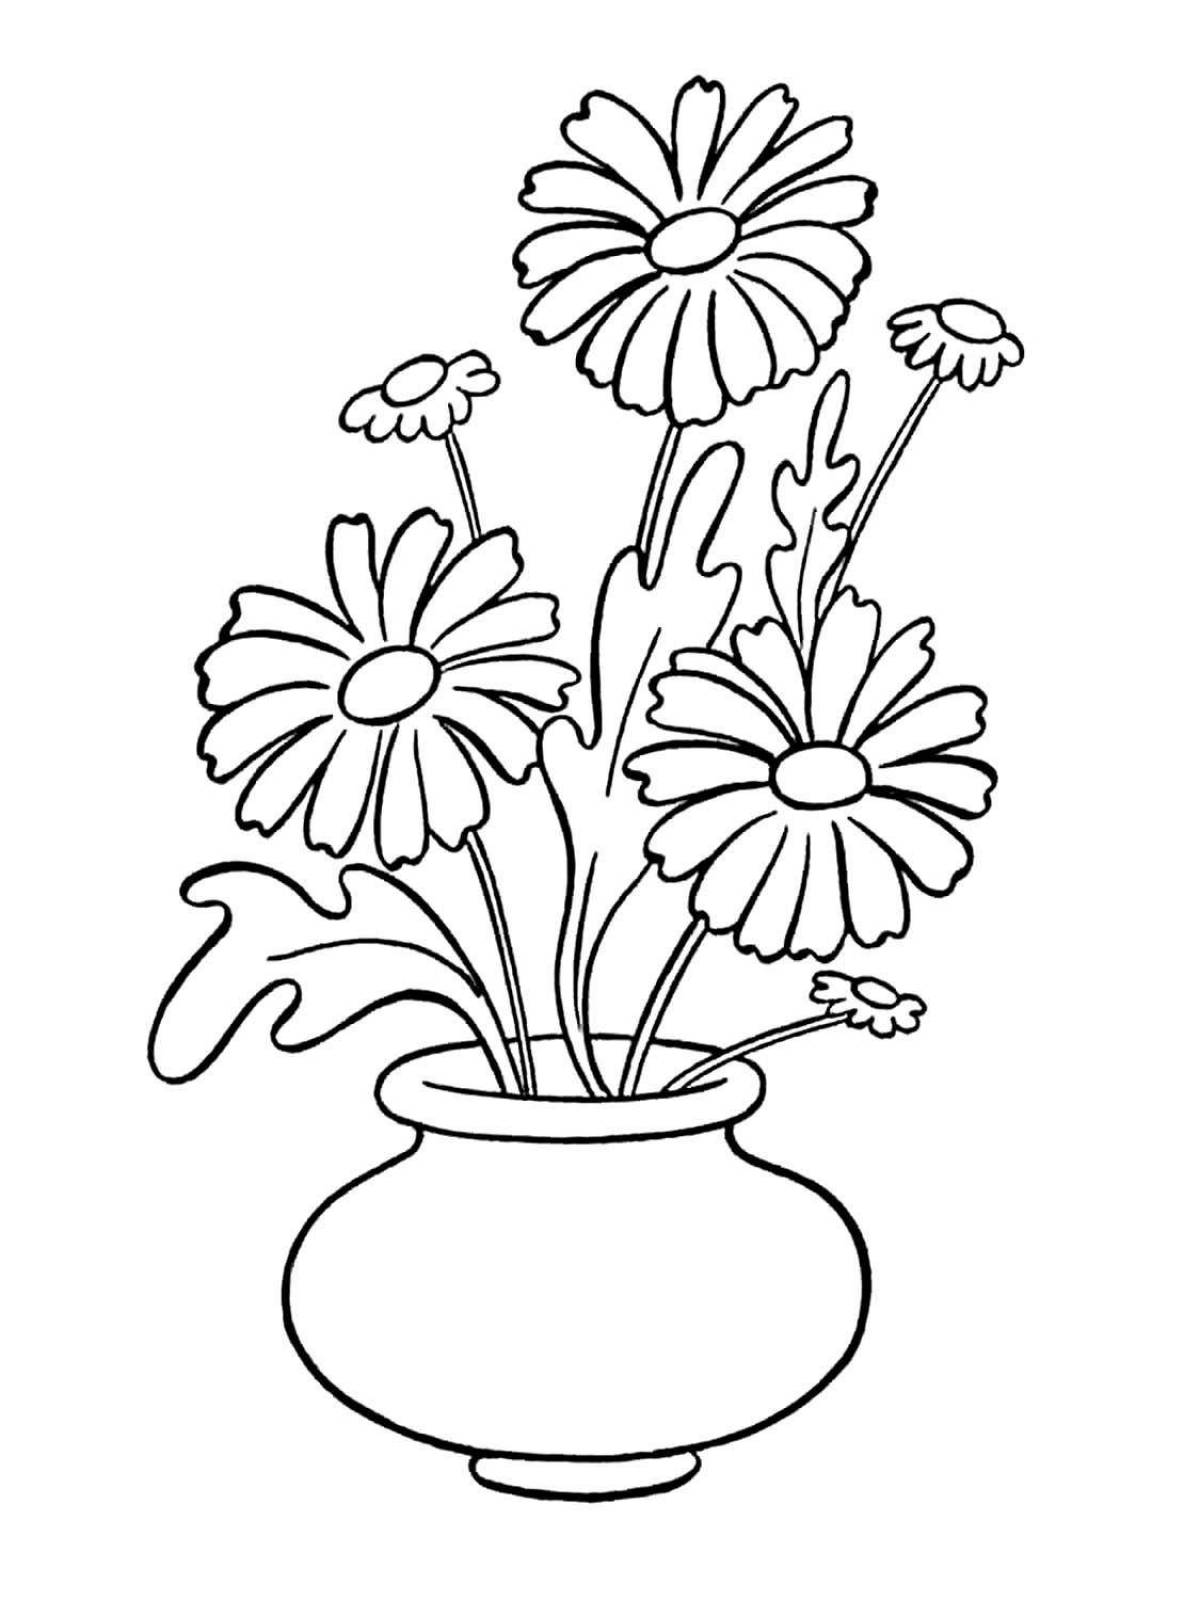 Colorful vase with flowers coloring book for children